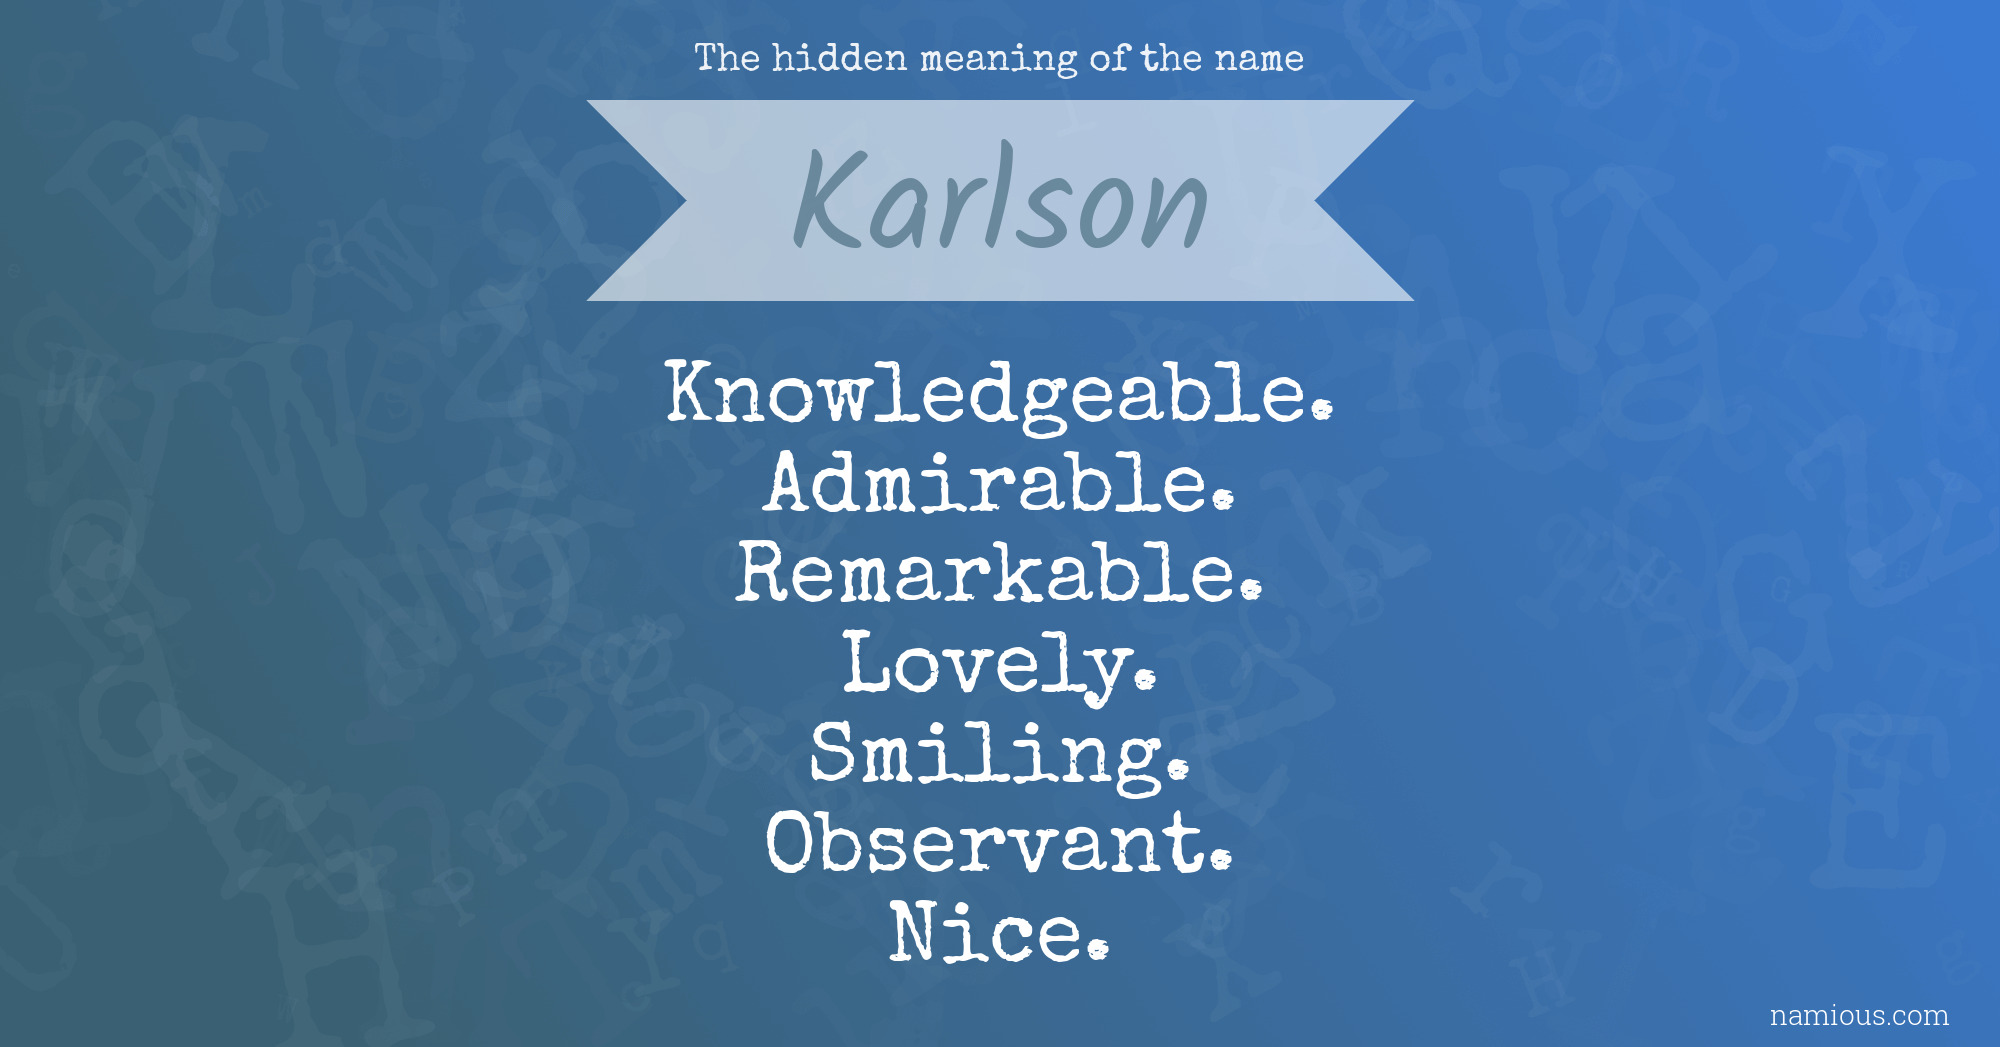 The hidden meaning of the name Karlson